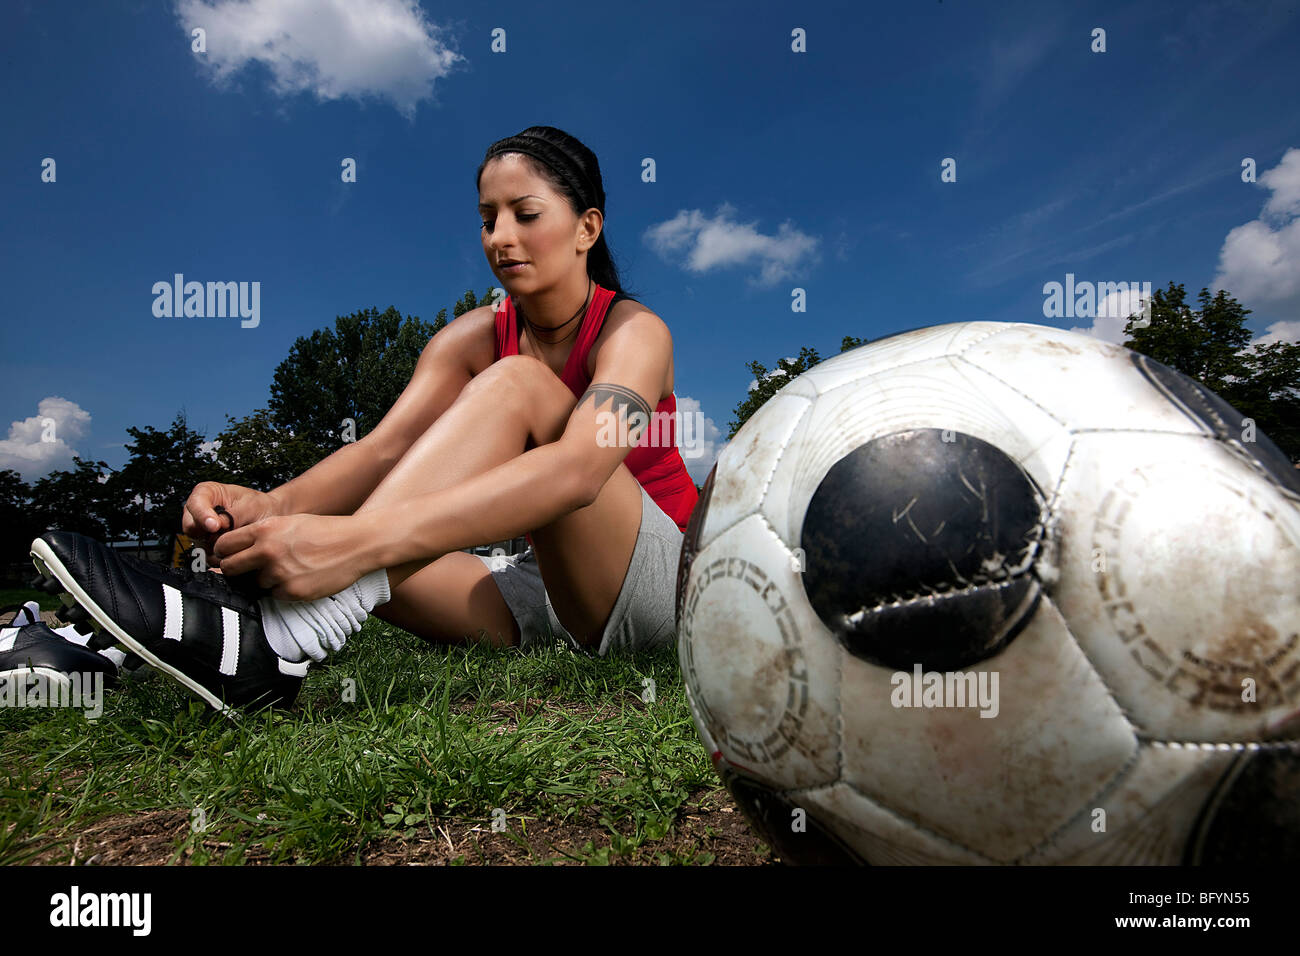 portrait of female football player tying her shoes Stock Photo